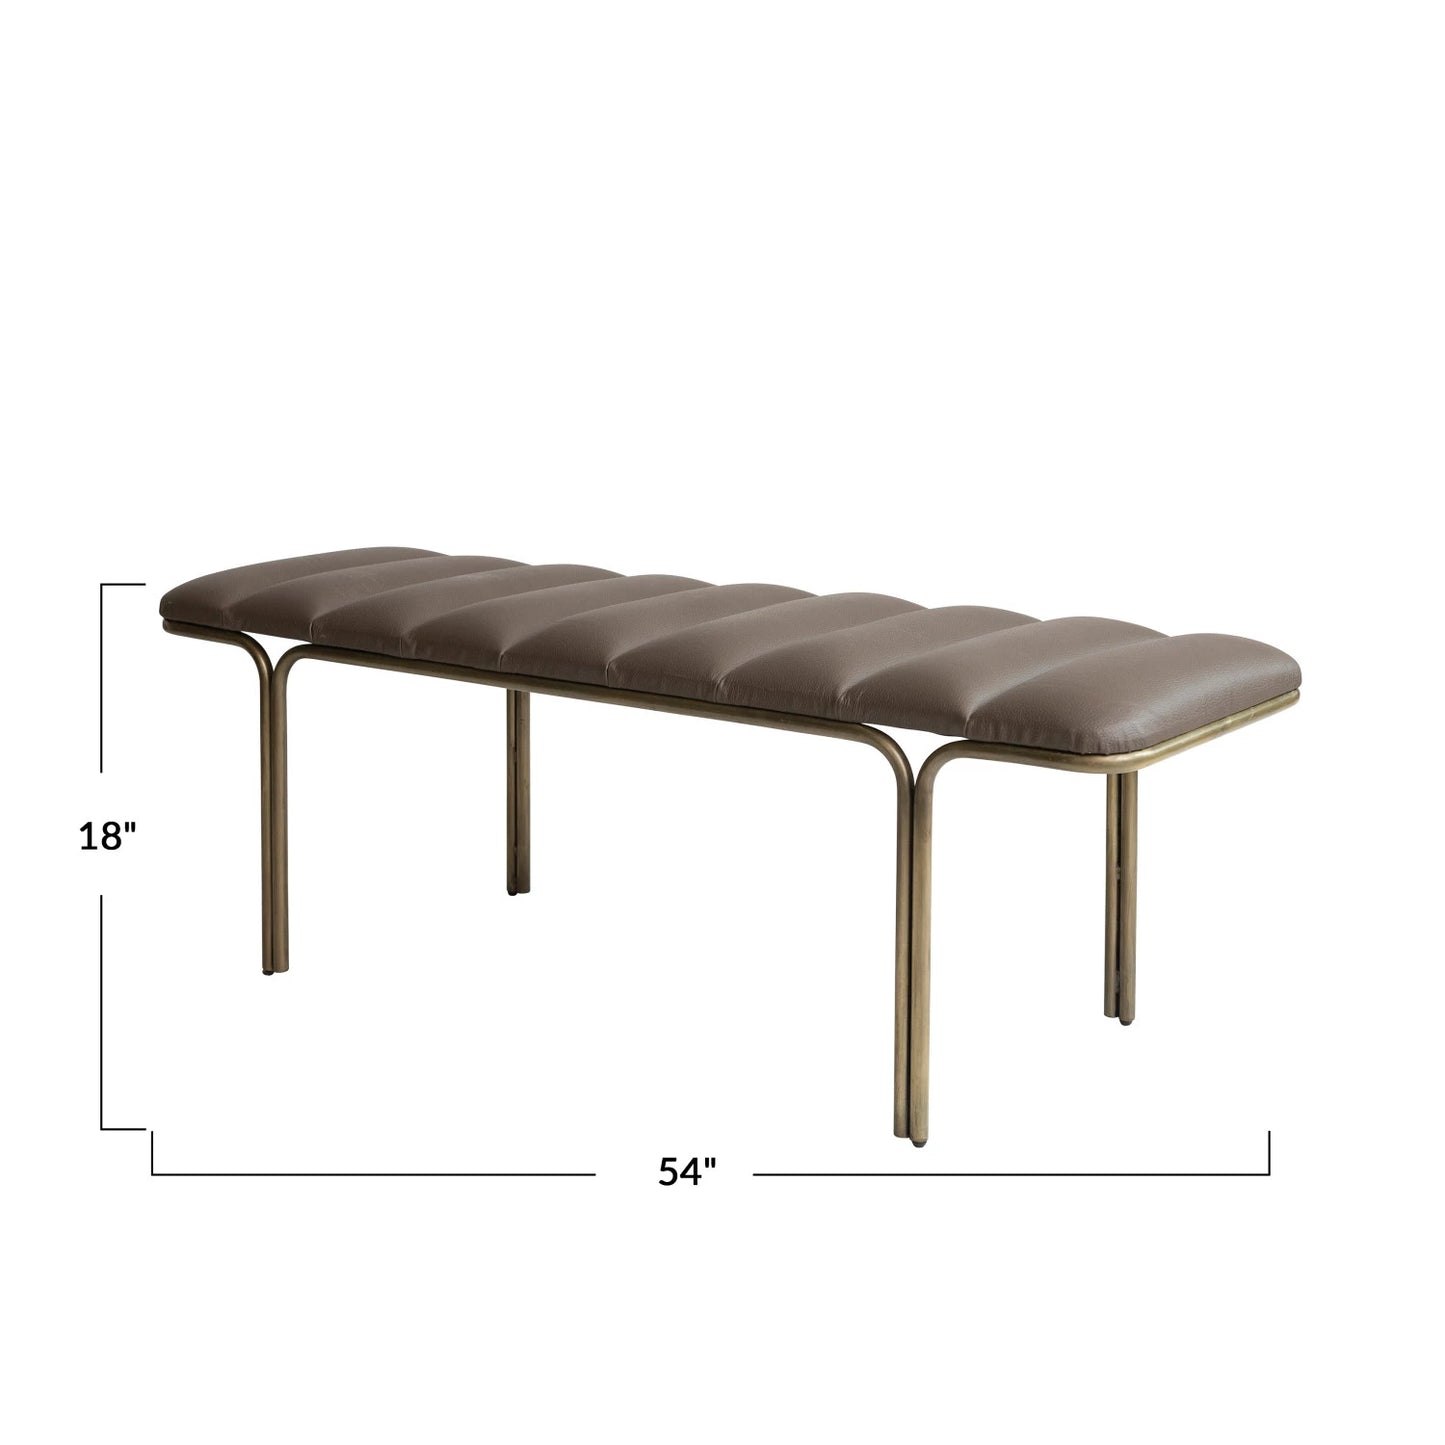 Upholstered Leather Bench w/ Channel Stitch